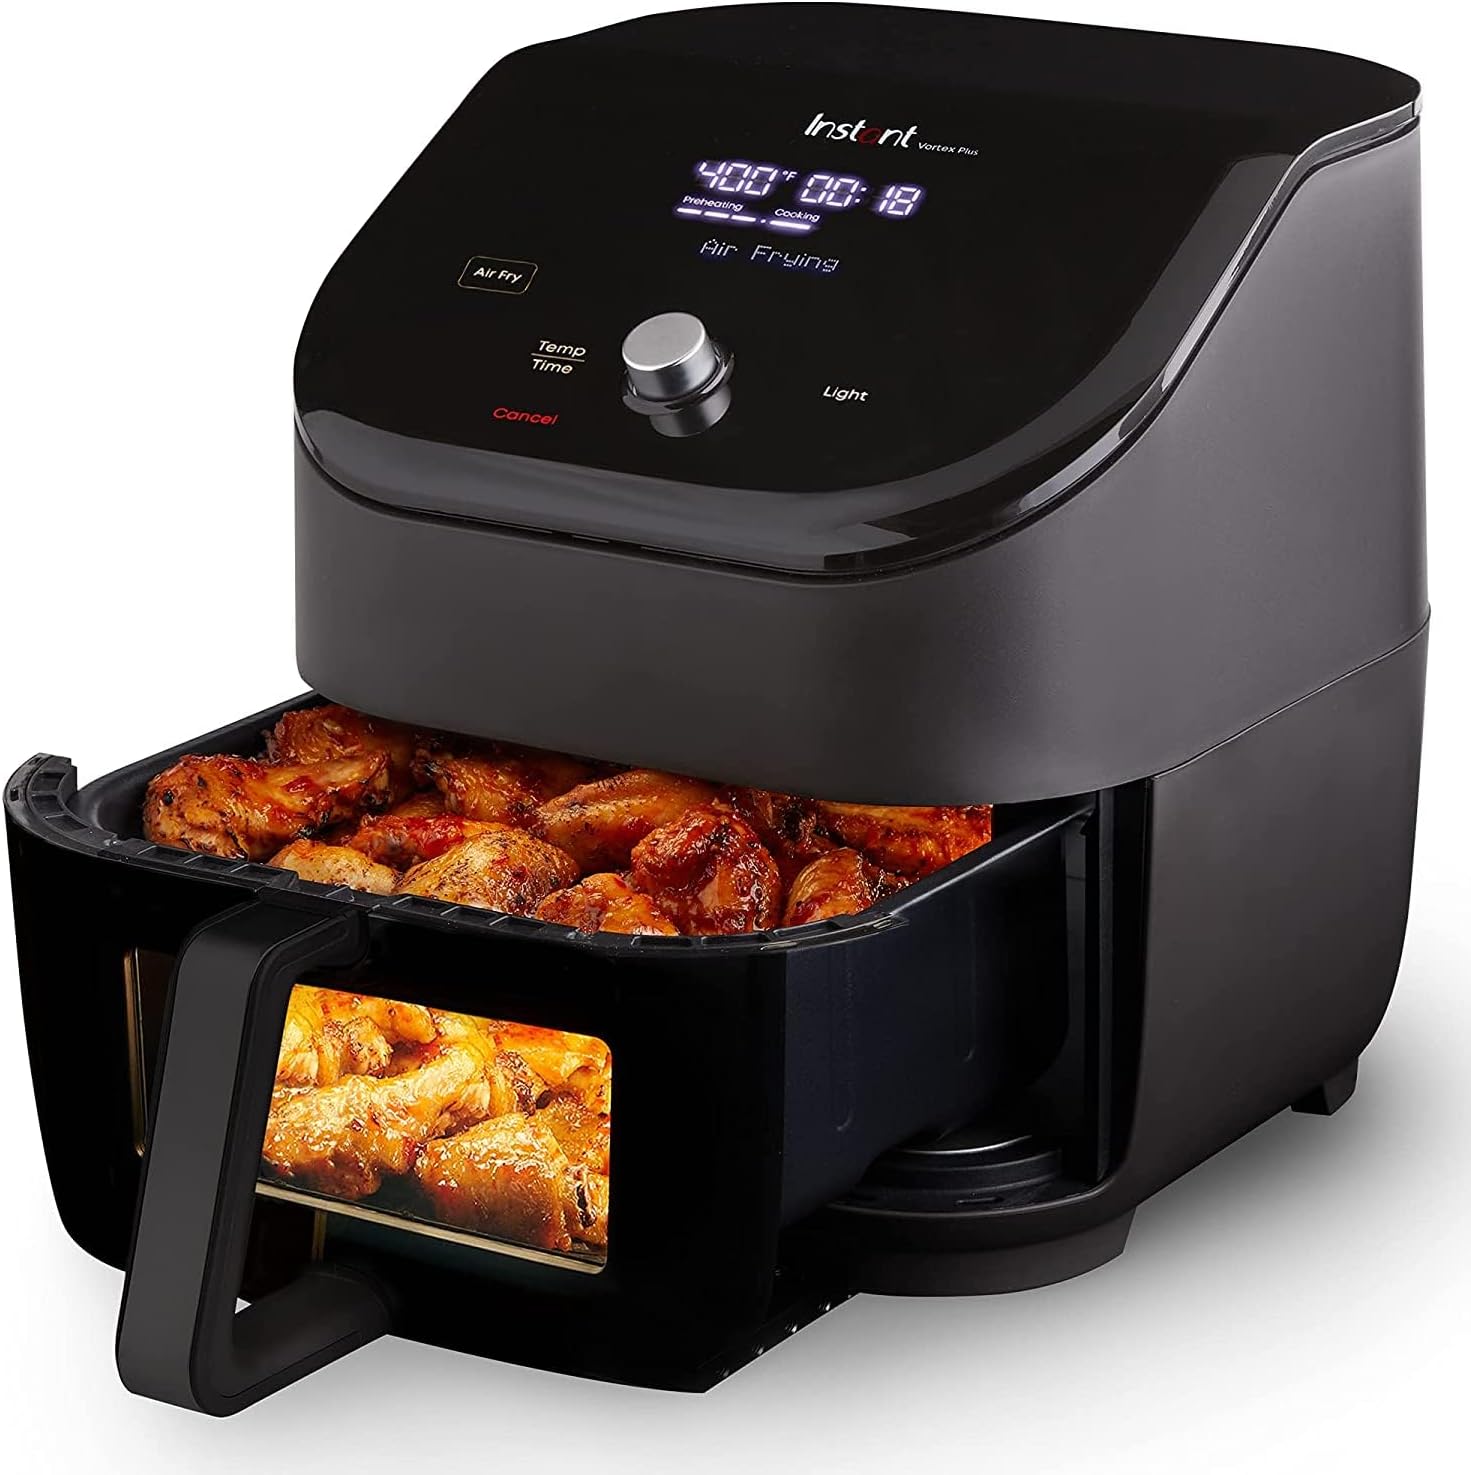 Instant Vortex Plus 6QT ClearCook Air Fryer, Clear Windows, Custom Program Options, 6-in-1 Functions, Crisps, Broils, Roasts, Dehydrates, Bakes, Reheats, from the Makers of Instant Pot, Black